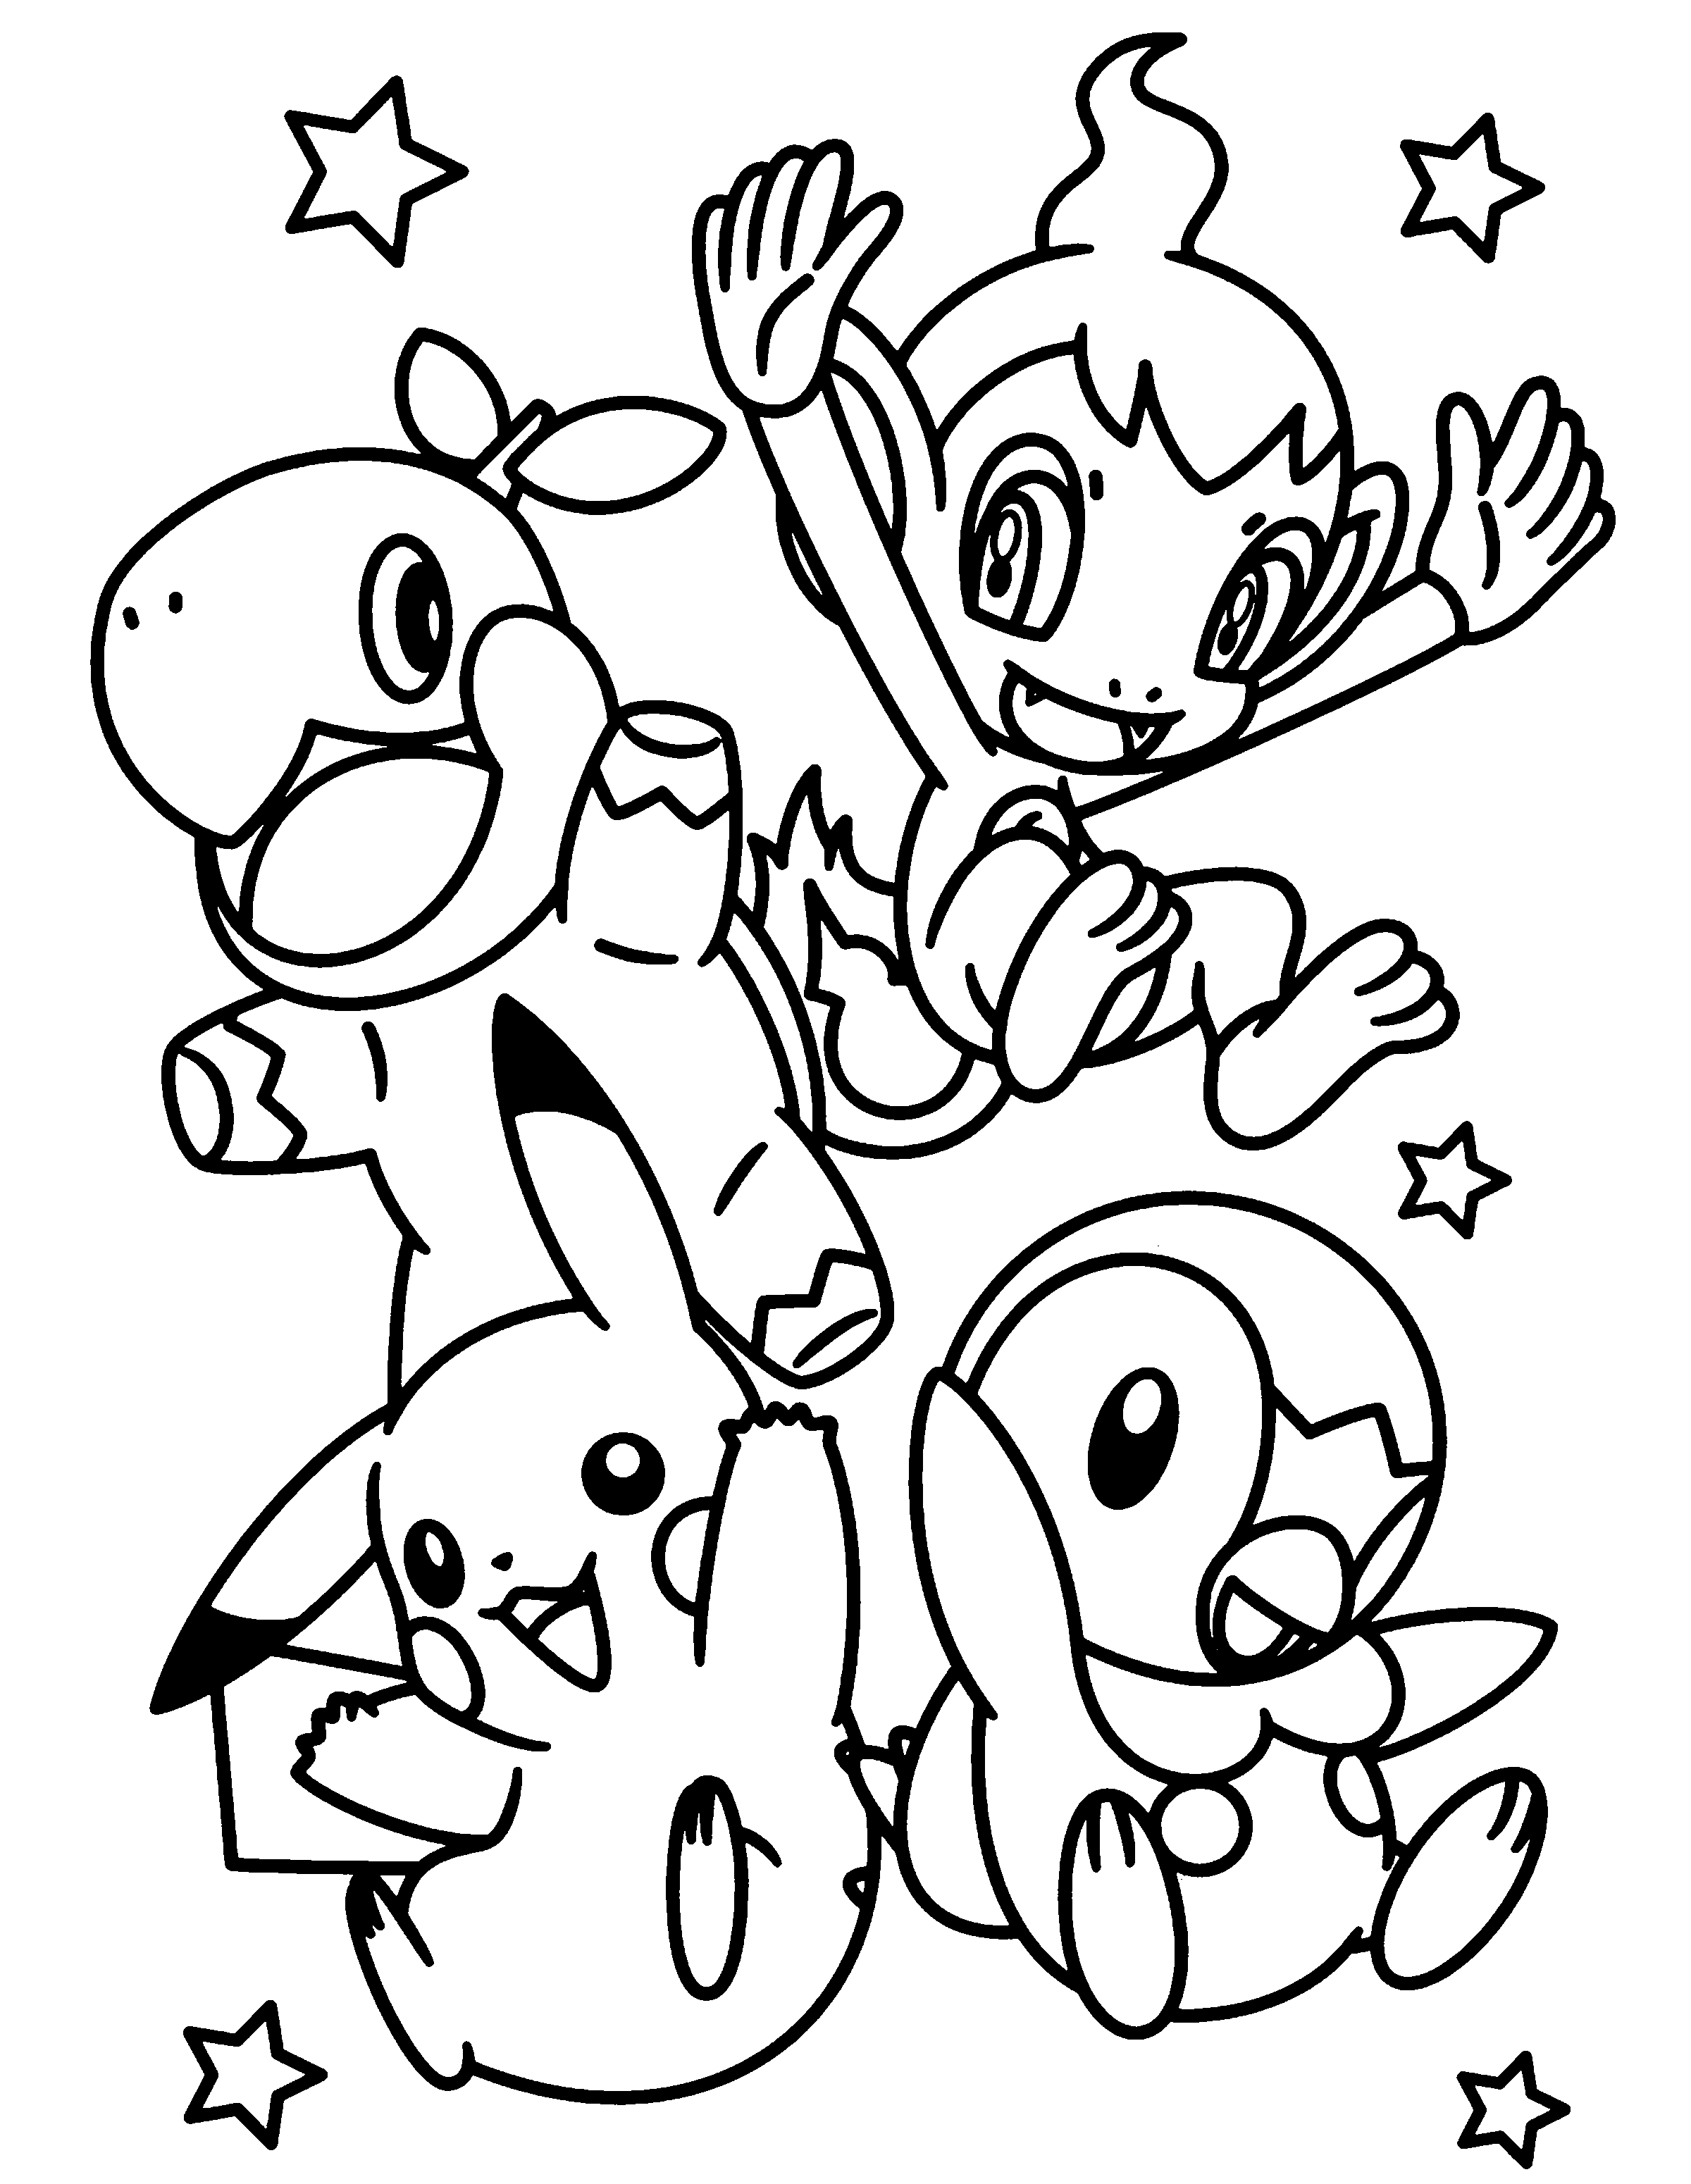 Pokemon Chimchar 9 Coloring Page Anime Coloring Pages